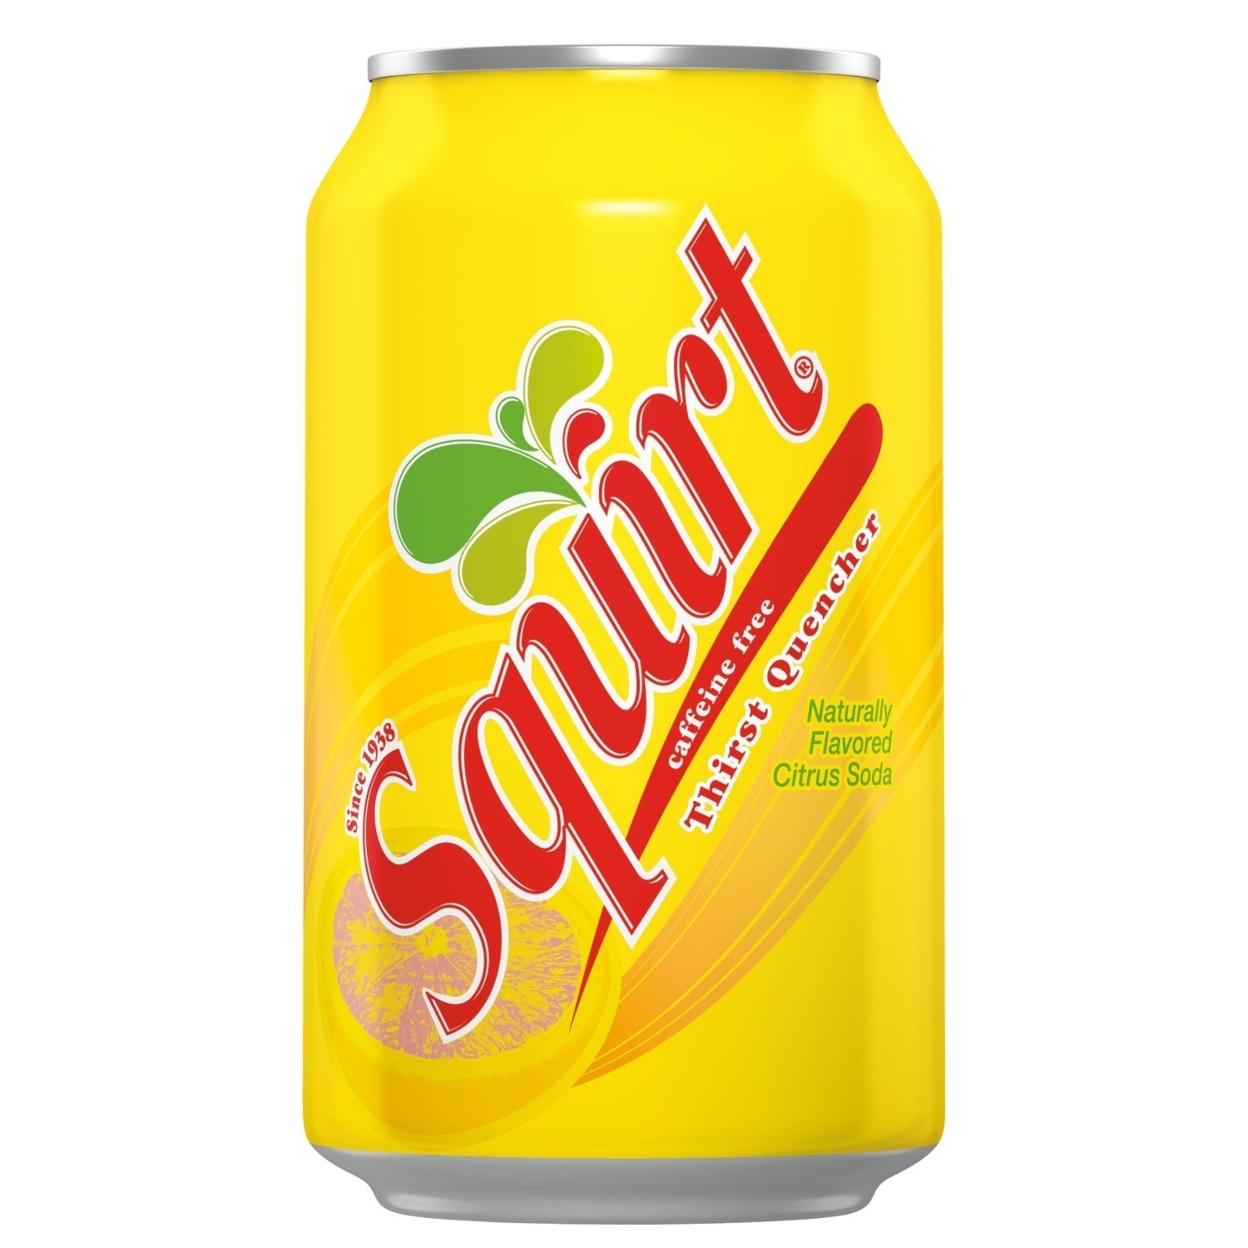 Squirt Citrus Soda (12 Ounce Cans, 24 Pack)